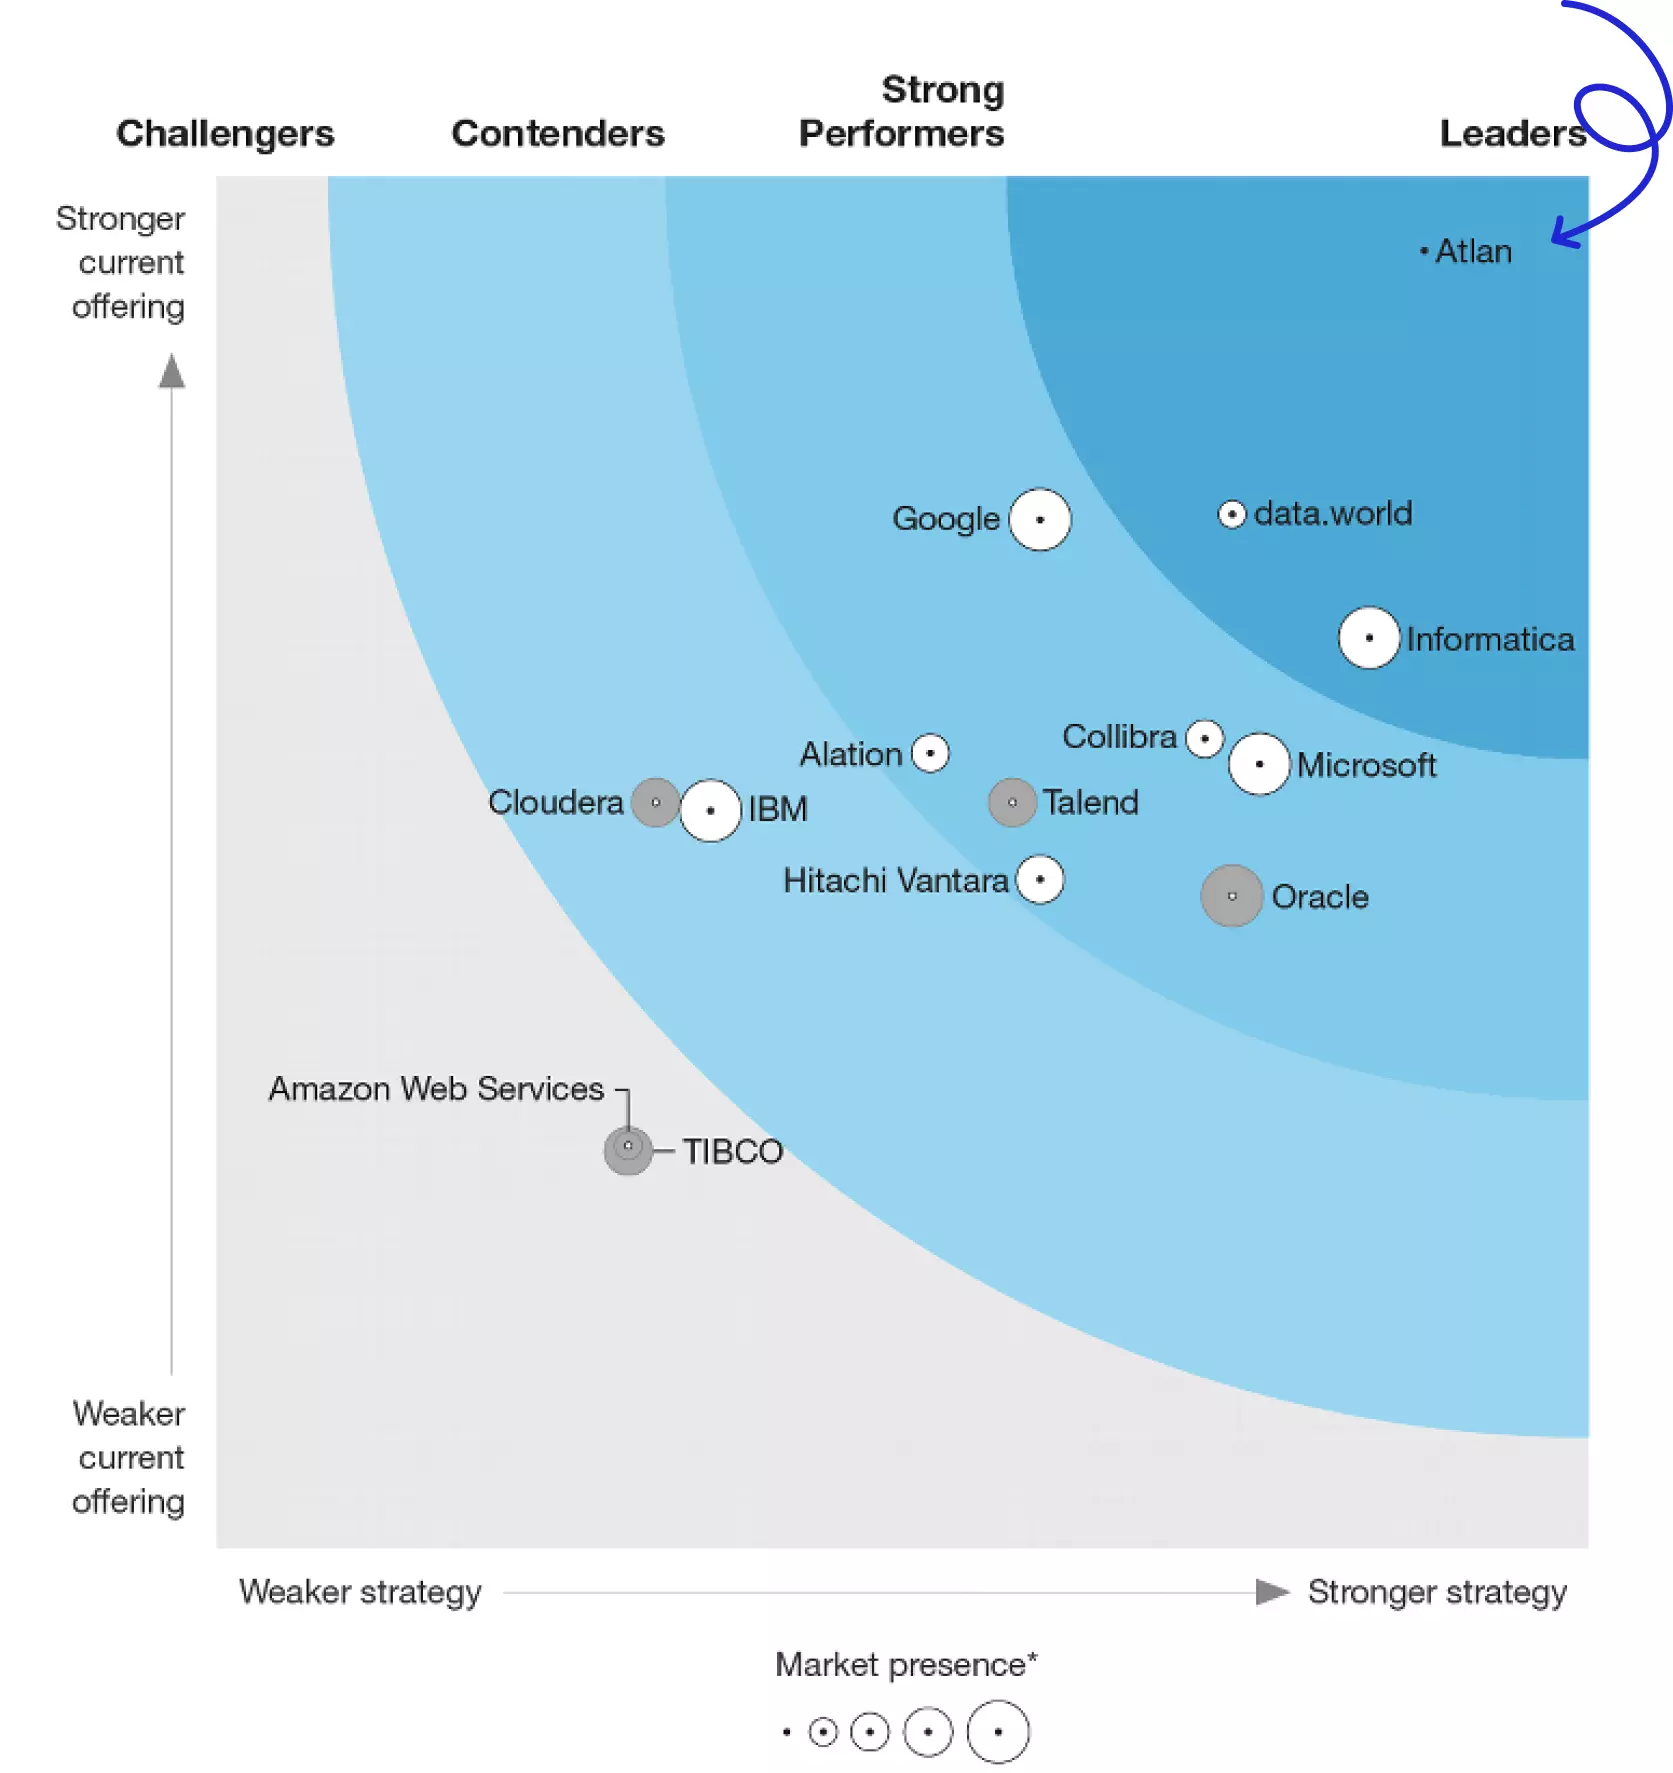 Atlan is recognized as a Leader in The Forrester Wave: Enterprise Data Catalogs for DataOps, Q2 2022 report